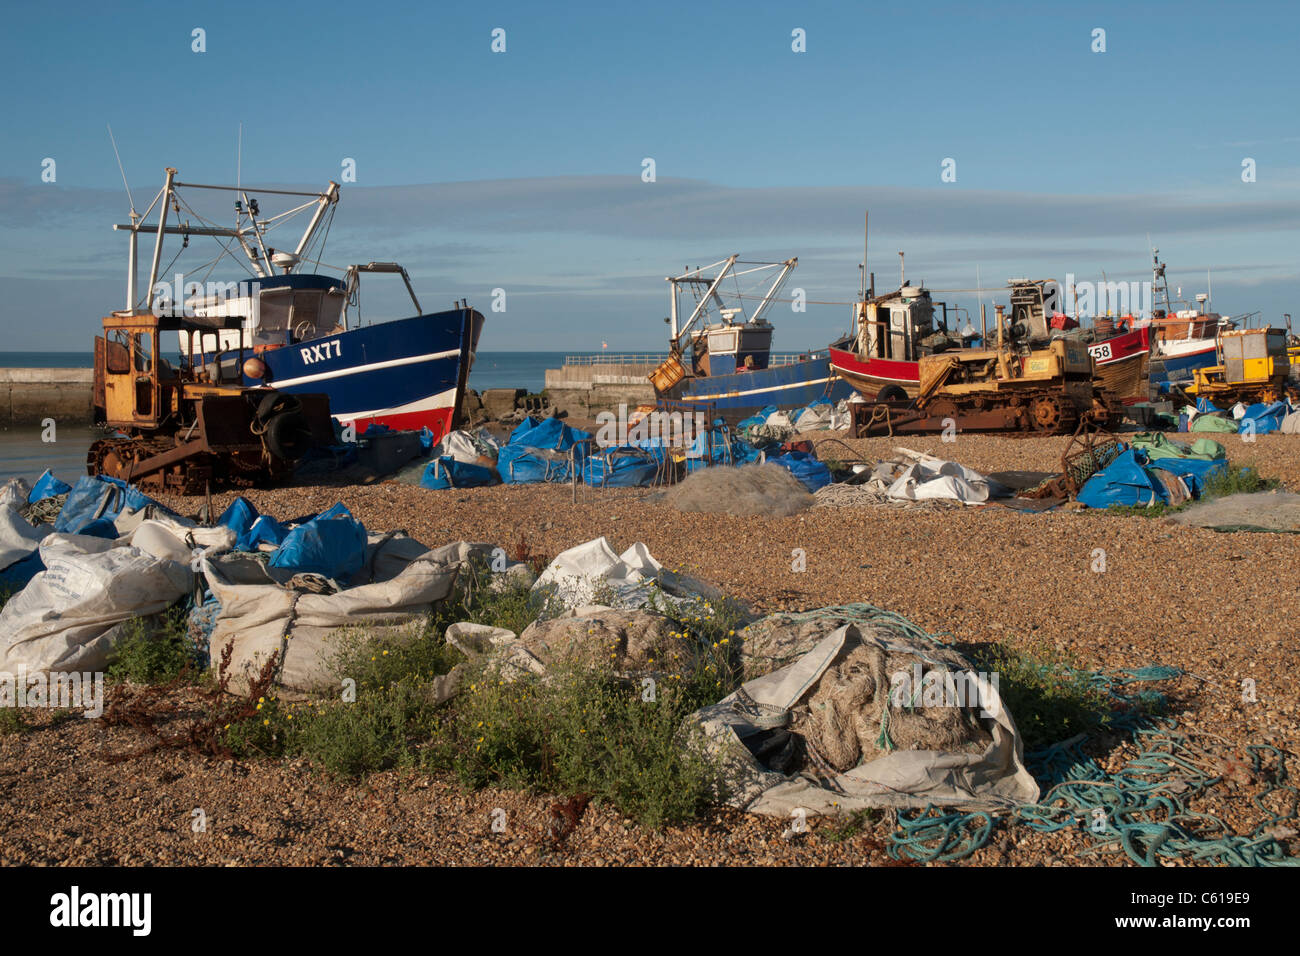 Hastings has the largest beach-based fishing fleet in England and the boats are moored on Harbour Beach. Stock Photo